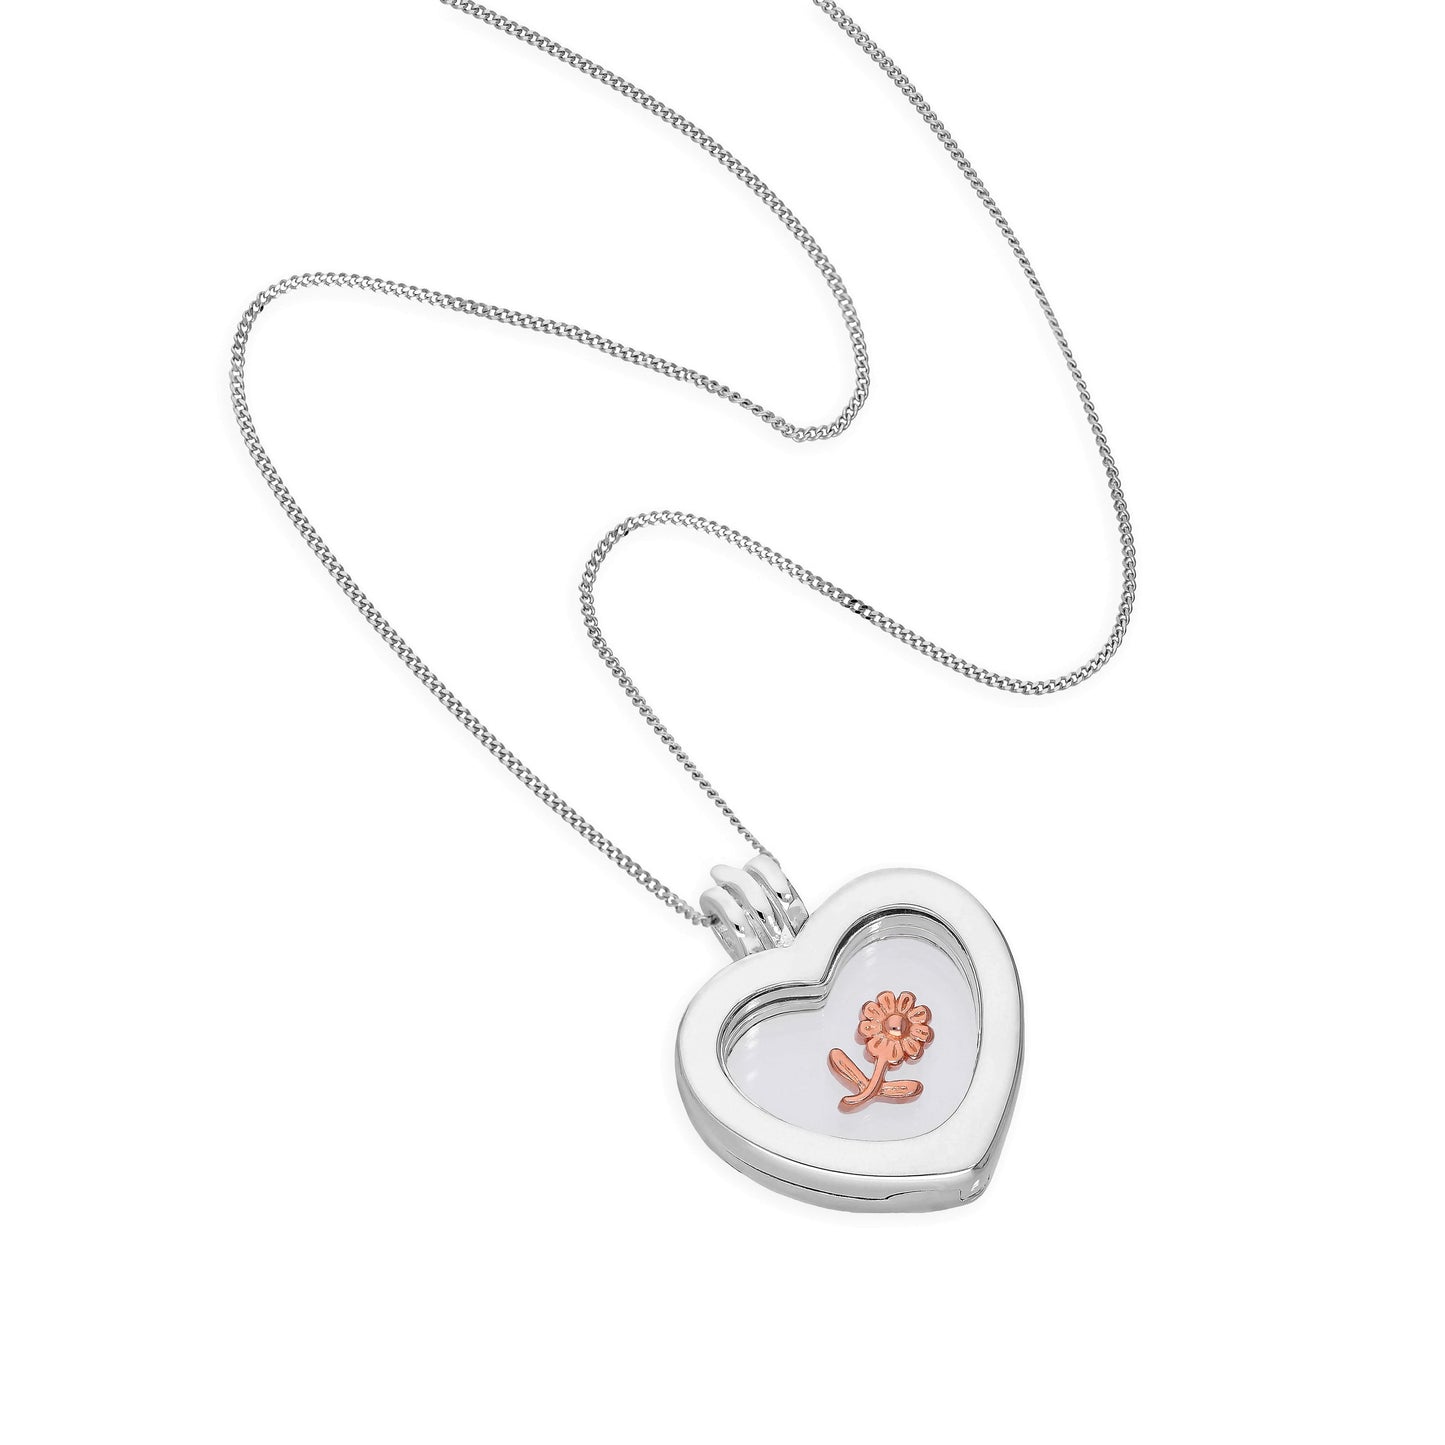 Kleine Sterling Silver Heart Floating Charm Medaillon auf Kette 16 - 22 Inches